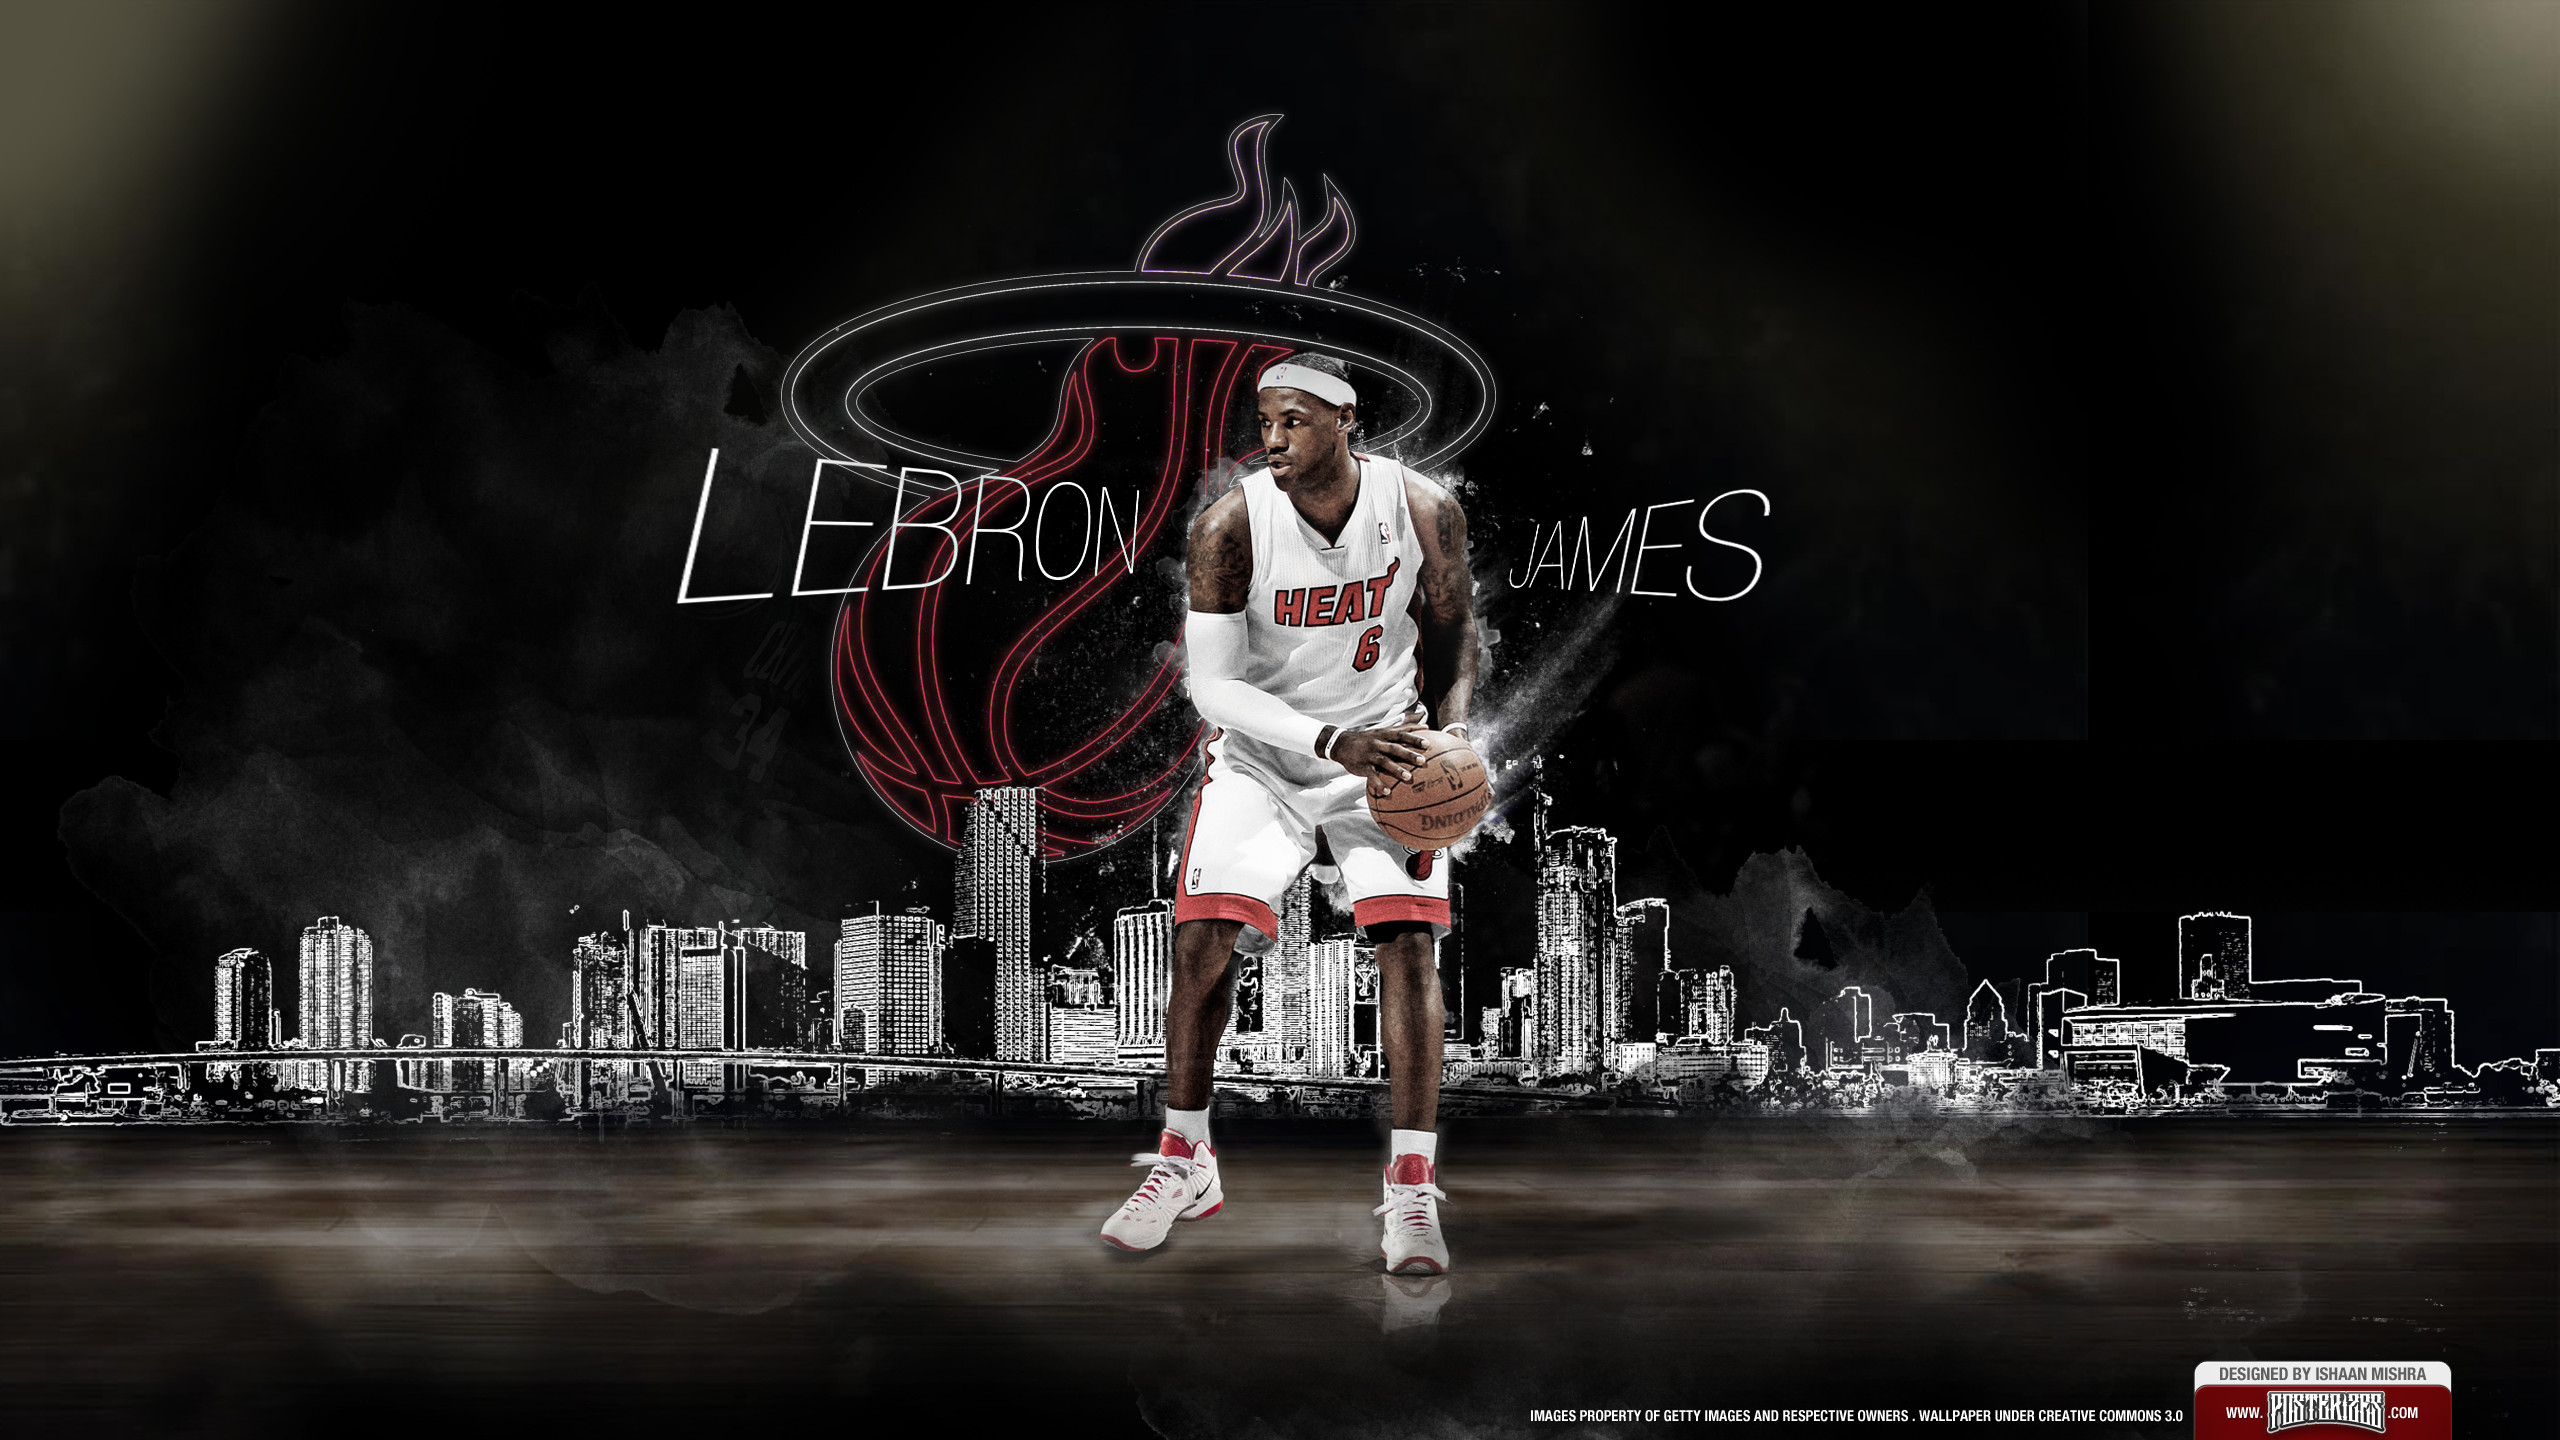 2560x1440 Download your LeBron James Wallpapers by clicking here.